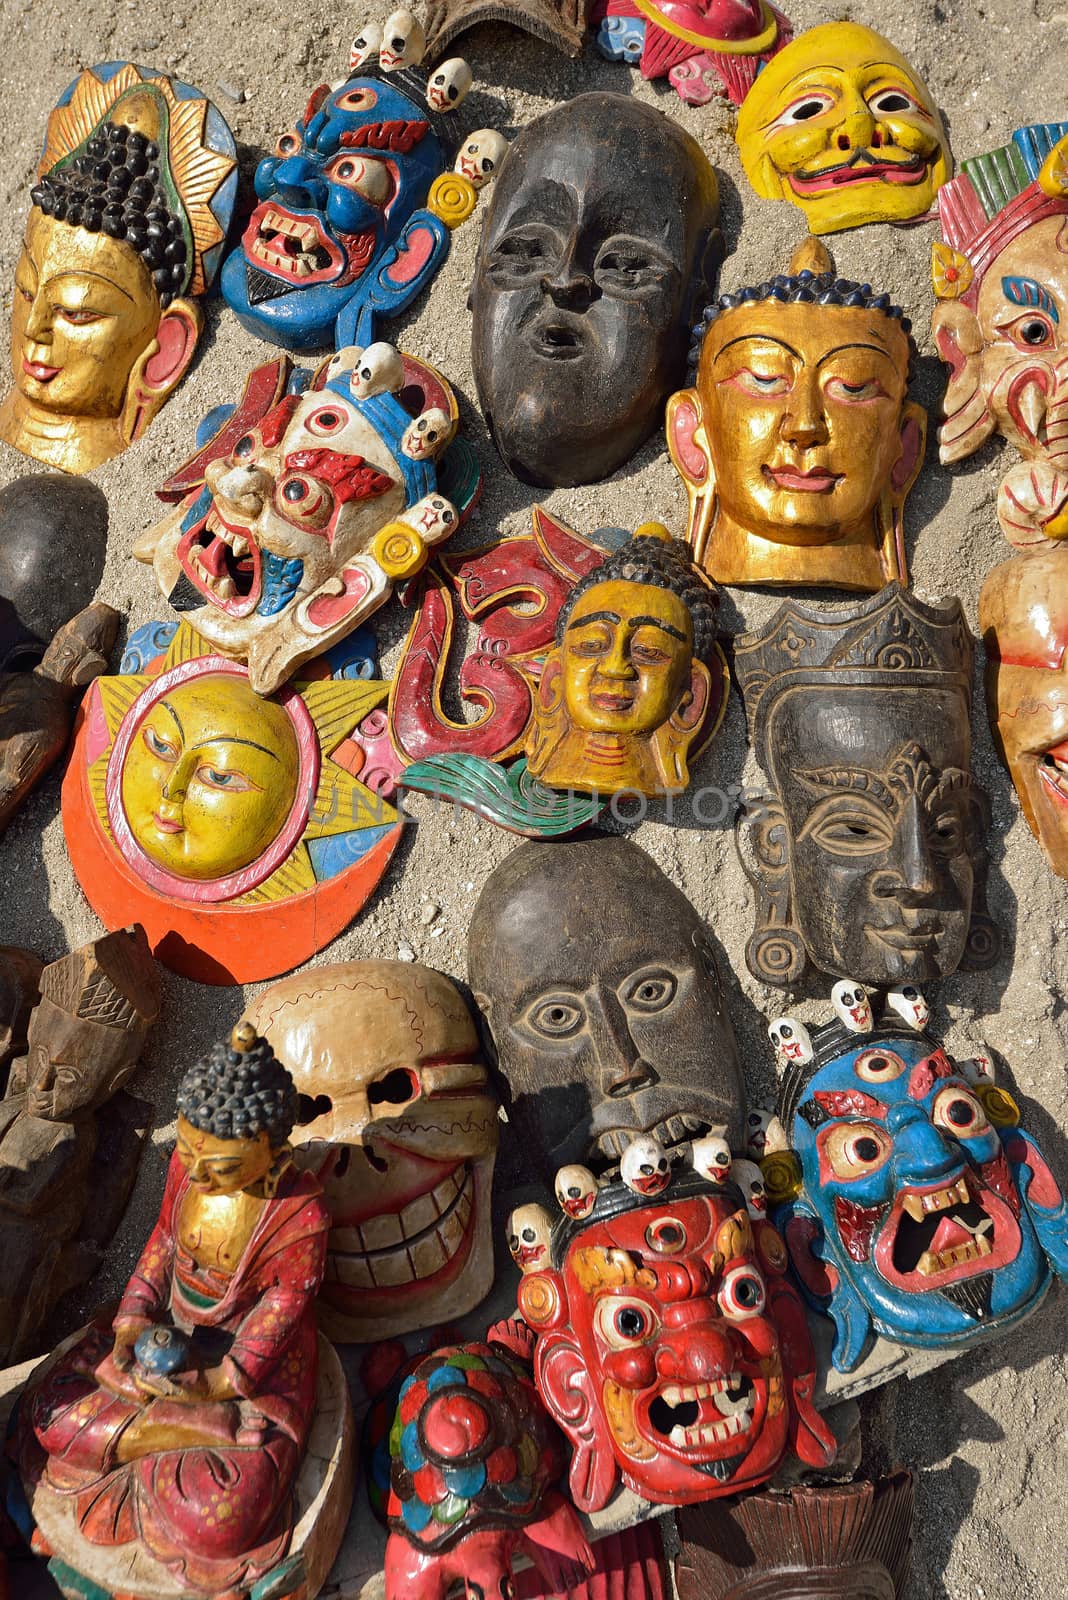 Masks, pottery,souvenirs, hanging in front of the shop, Bhaktapu by think4photop